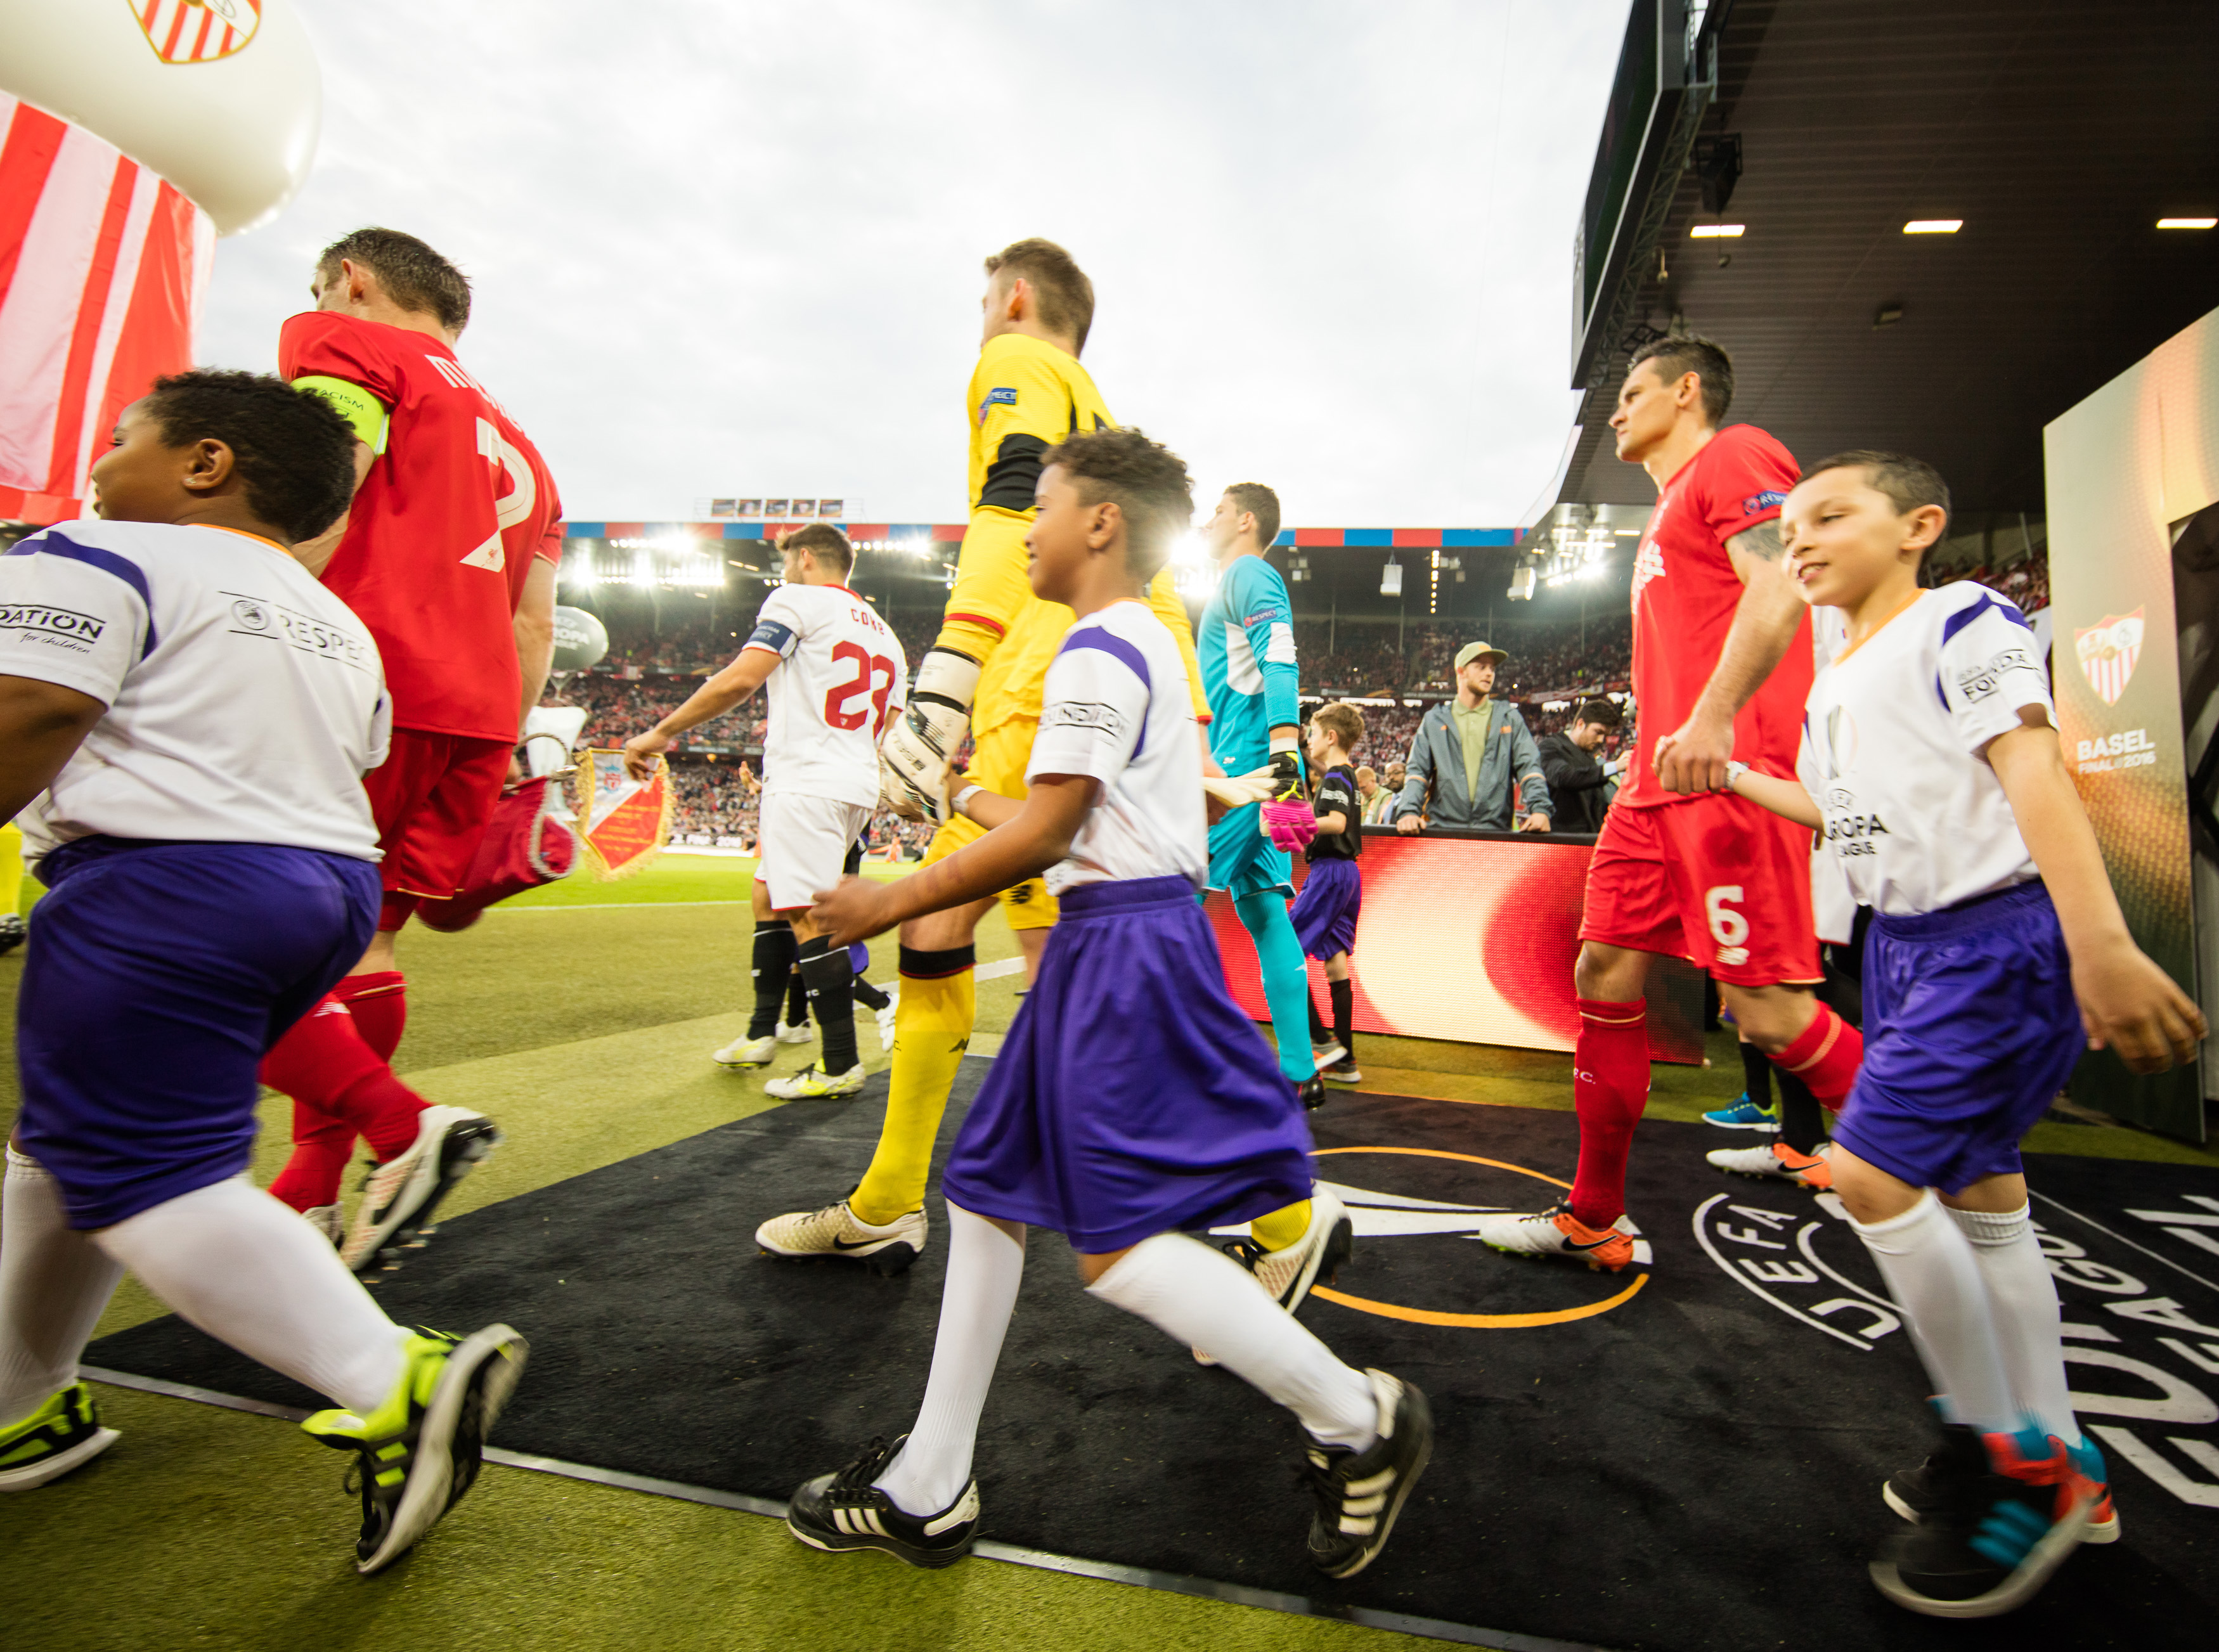 BASEL, SWITZERLAND - MAY 18:  Fedex player escort kids are seen prior to the UEFA Europa League Final between Liverpool and Sevilla at St. Jakob-Park on May 18, 2016 in Basel, Switzerland.  (Photo by Simon Hofmann - UEFA/UEFA via Getty Images)